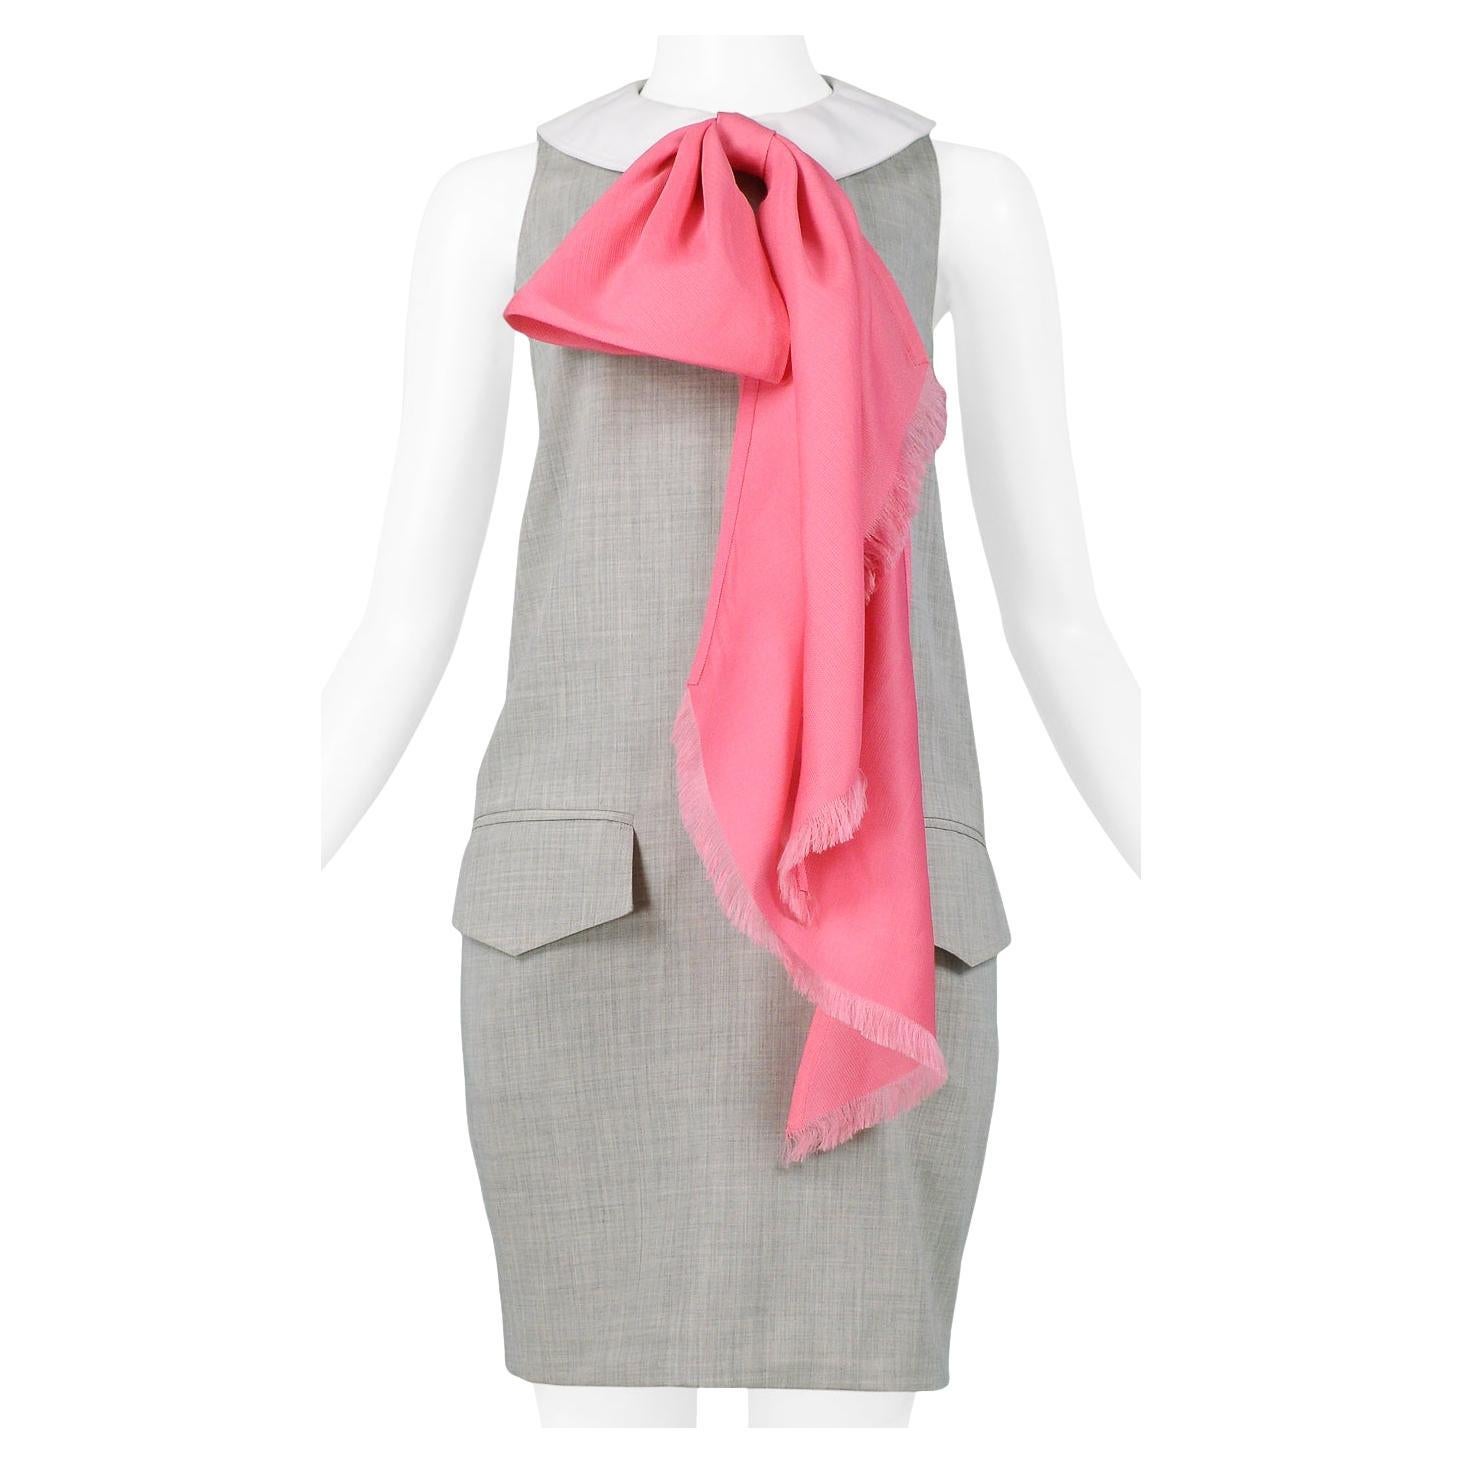 Issac Mizrahi Grey Dress With Pink Bow 1991 For Sale